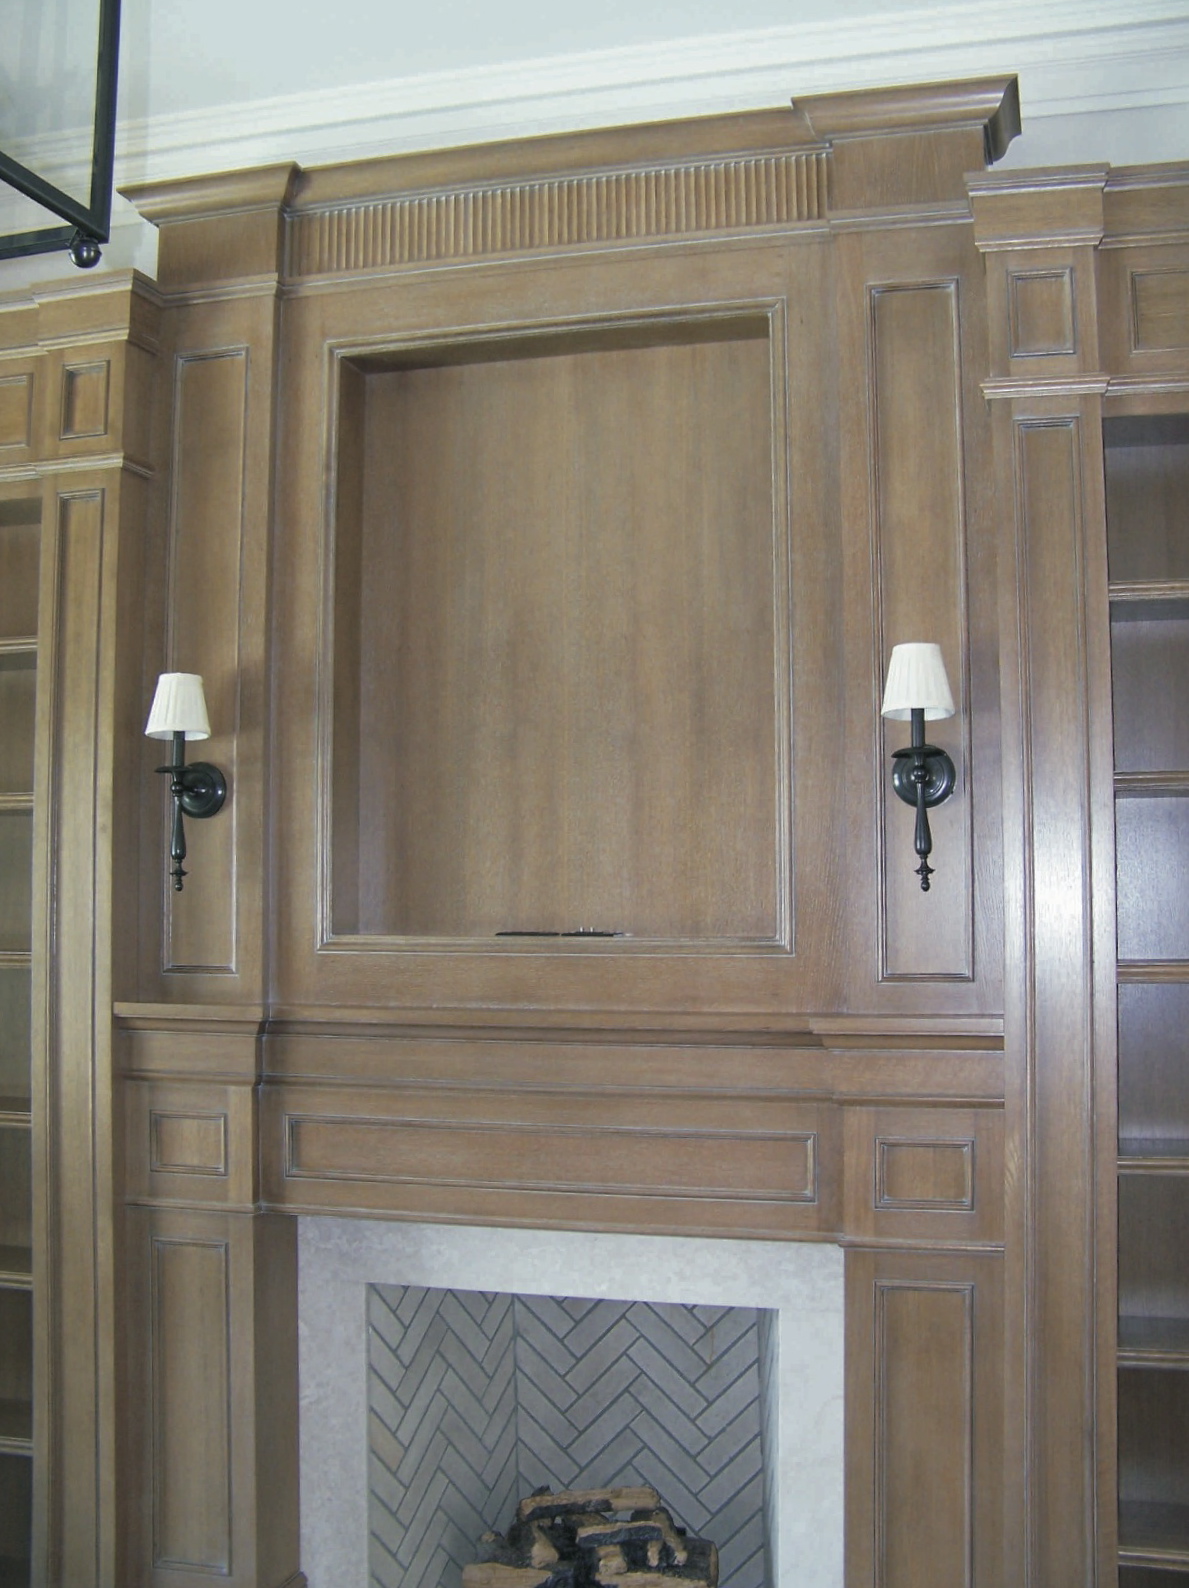 Fireplace area of library, panelling, ceilings, etc., oak with cerusing